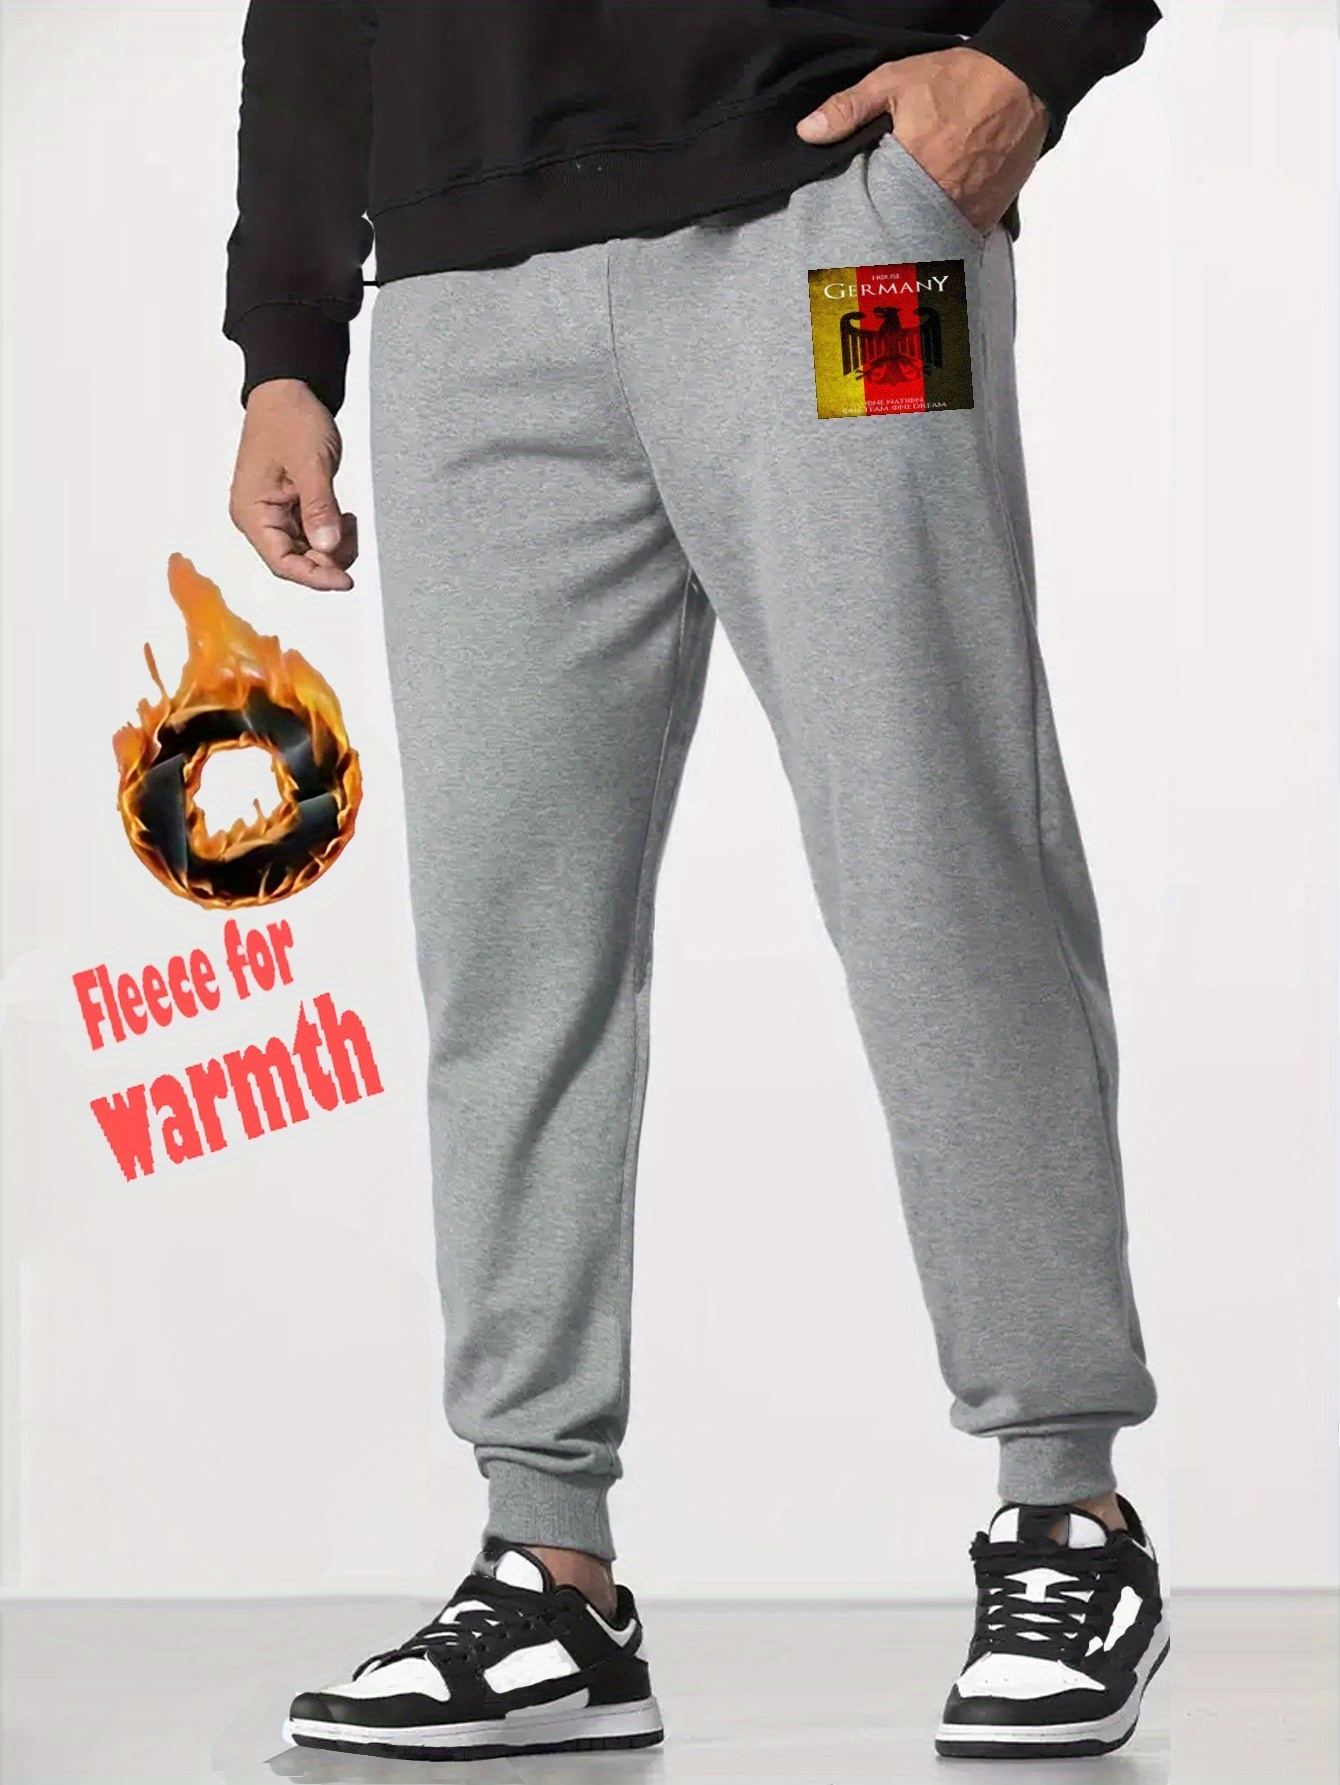 How To Style Joggers In 10 Different Styles  Gym outfit men, Sport outfit  men, Mens outfits